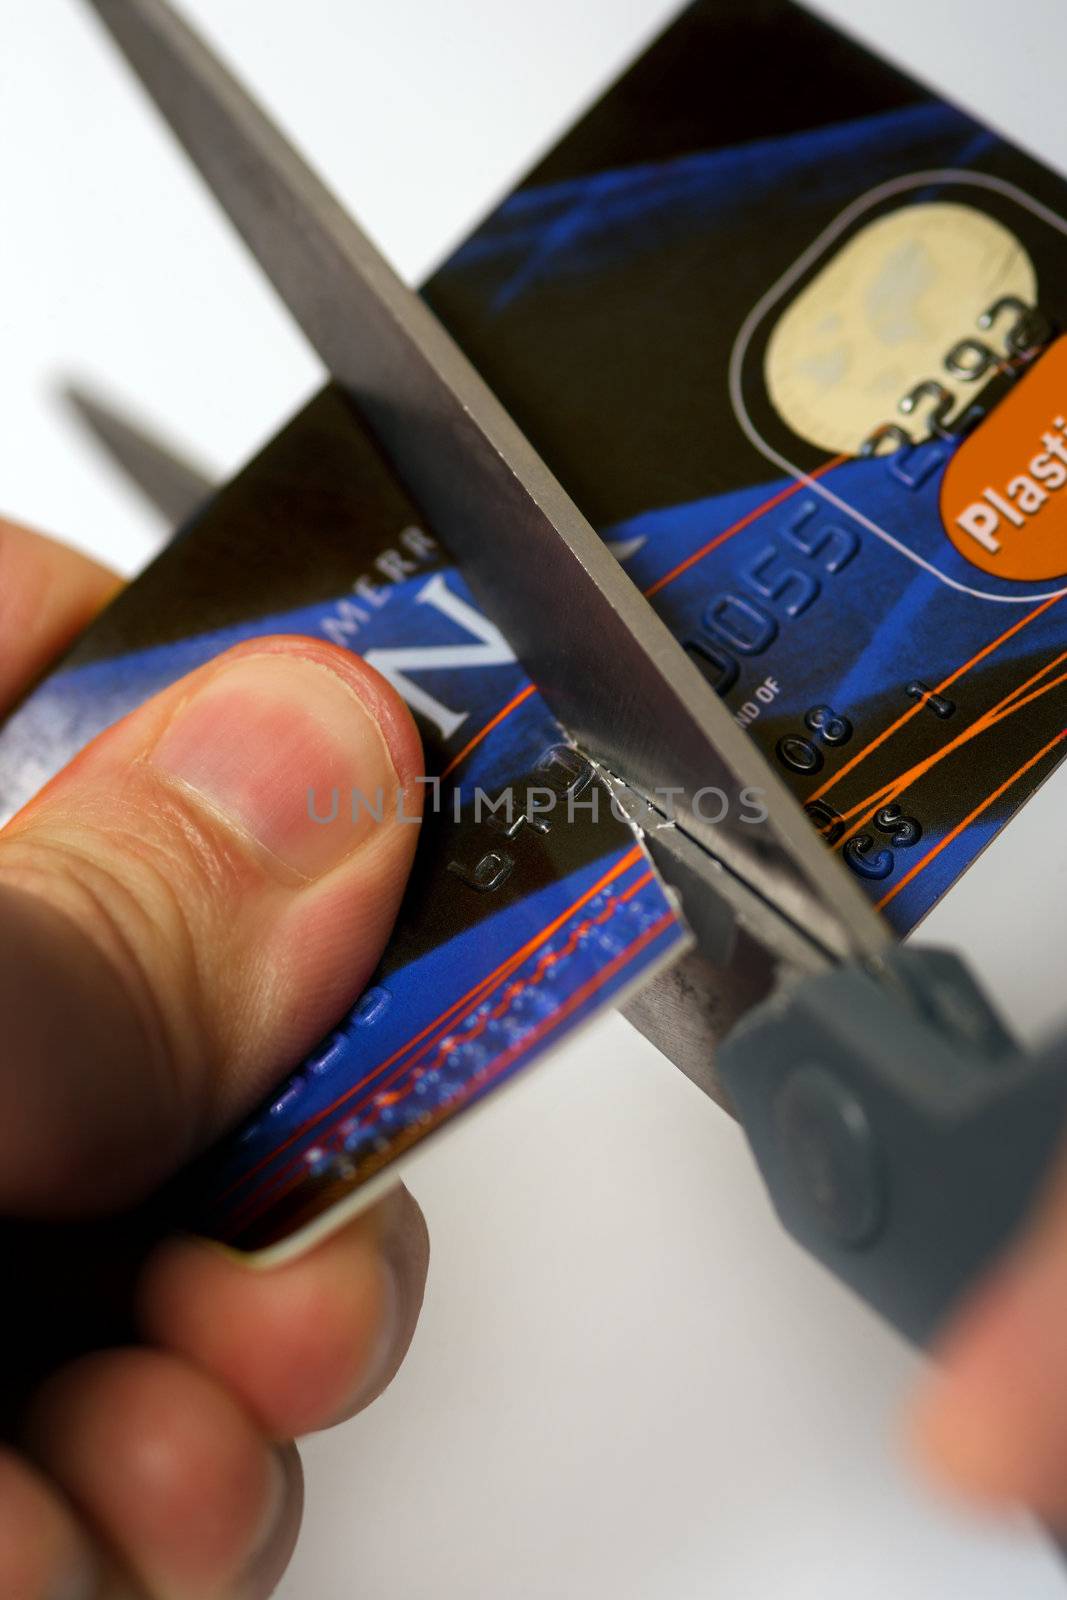 Macro image of scissors cutting through a credit card.  Logos are fake and numbers have been changed.  Colours of the card have been altered also.